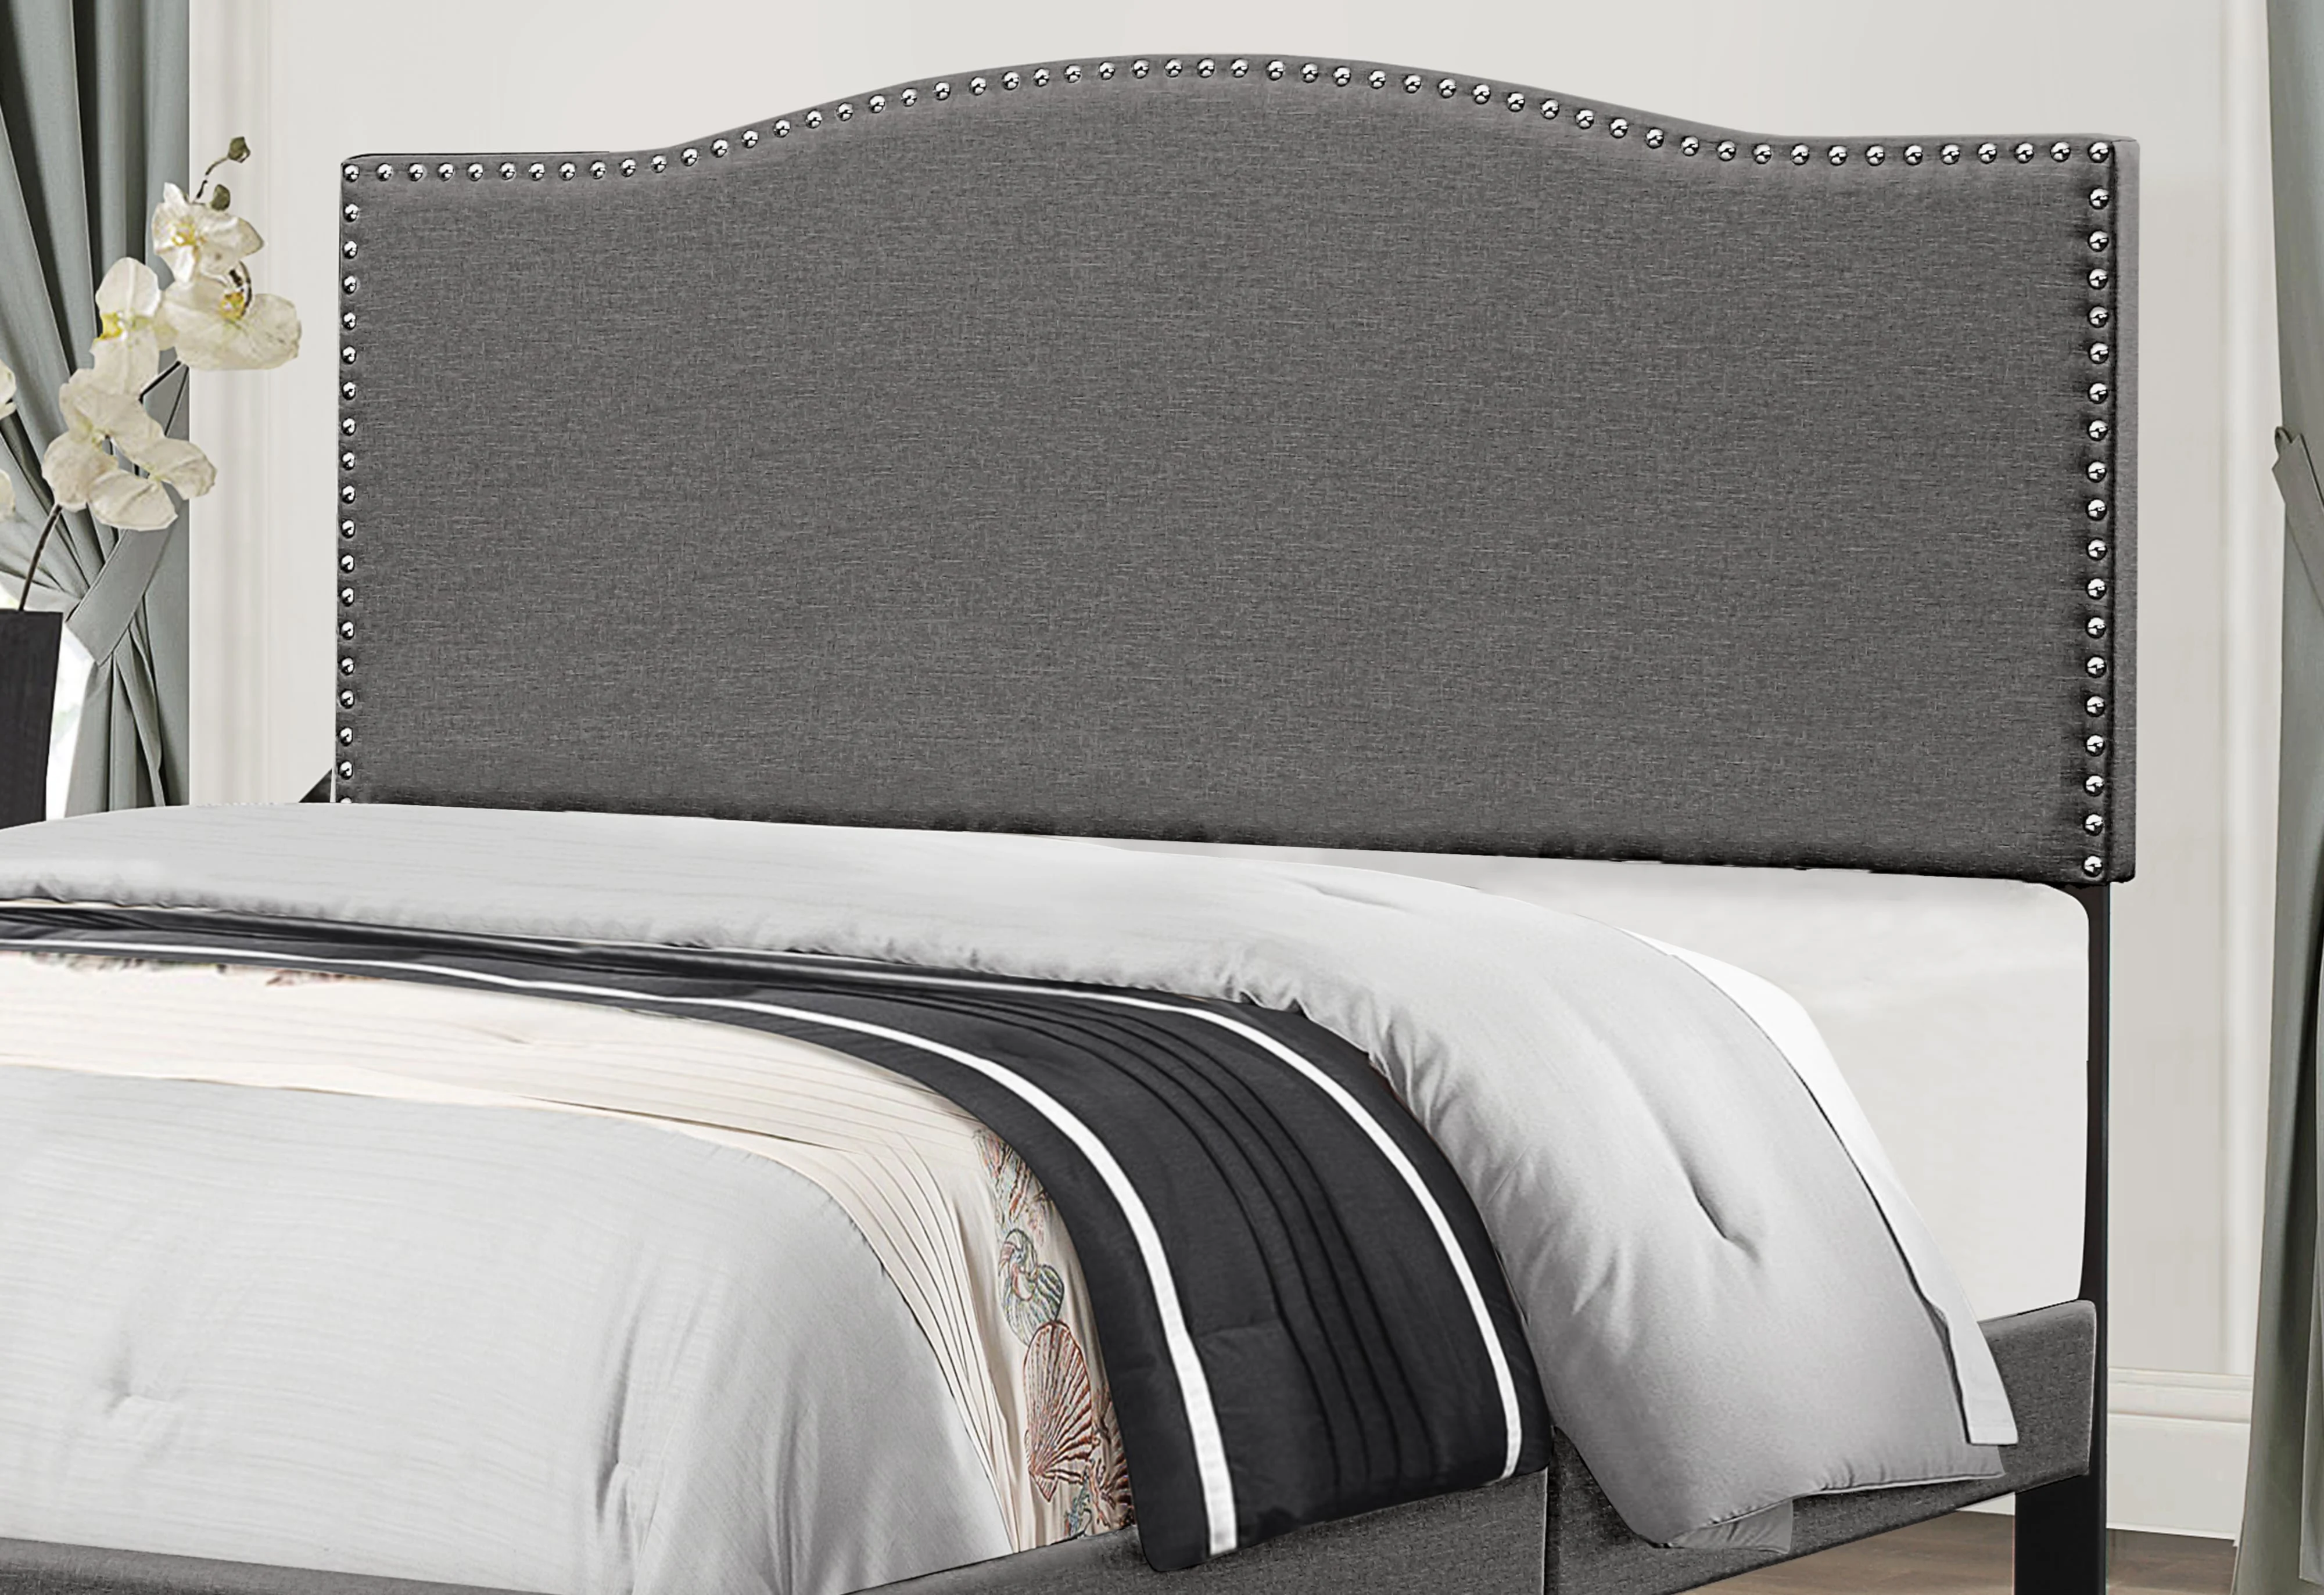 Hillsdale Kiley King Upholstered Headboard with Frame | A1 Furniture ...